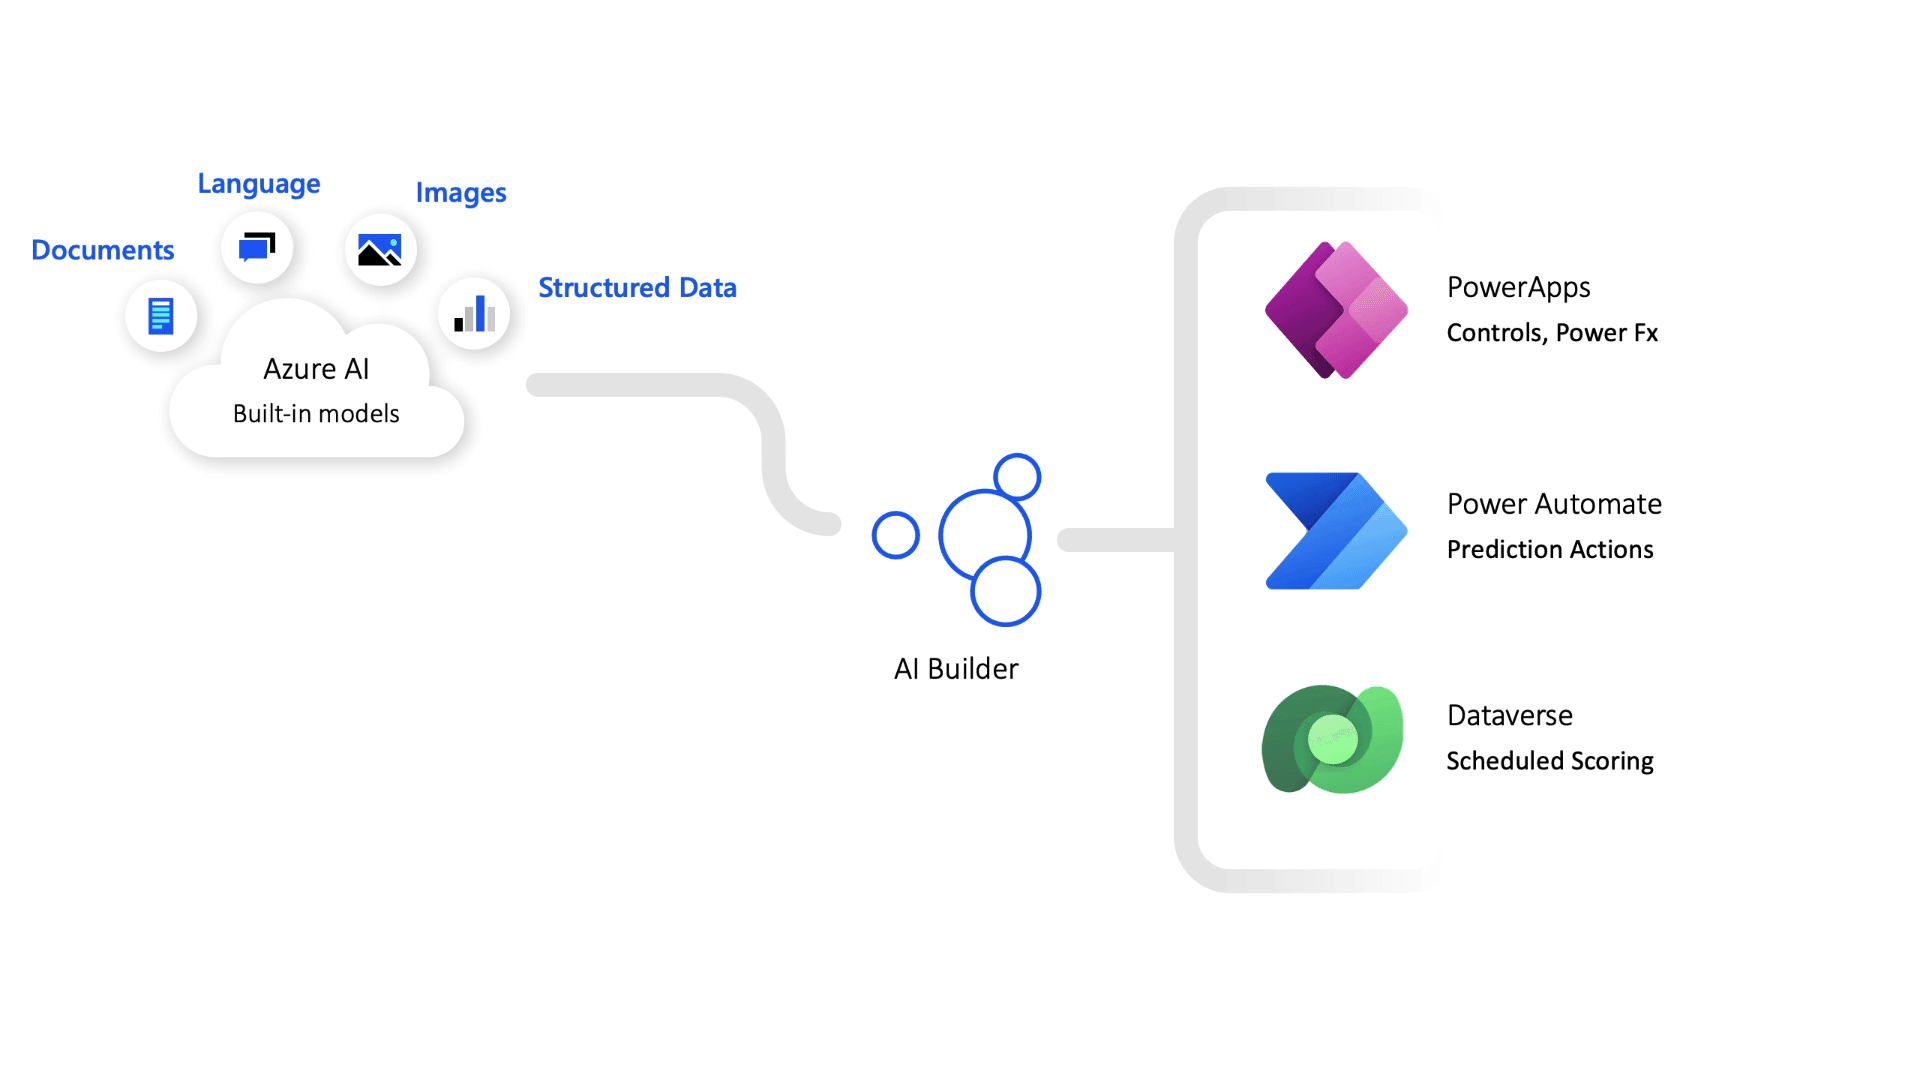 A diagram showing that your own AI models can be registered to AI Builder, along side the other Azure AI built-in models, to be used in Power Apps, Power Automate, and Dataverse